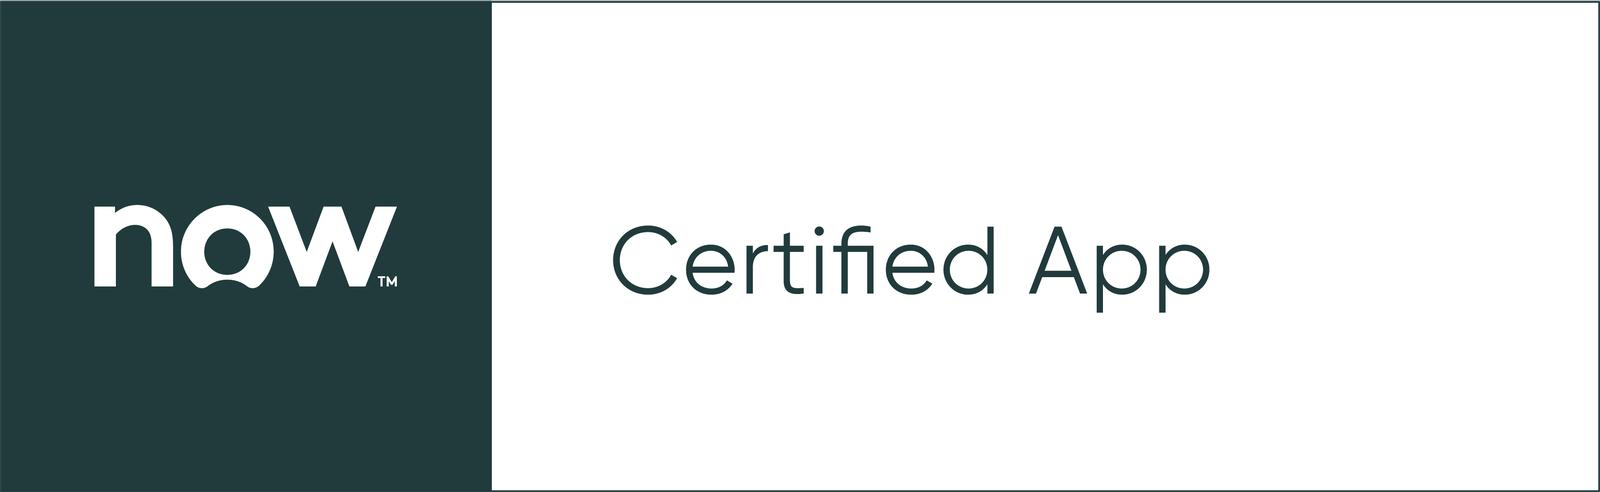 servicenow certified app image